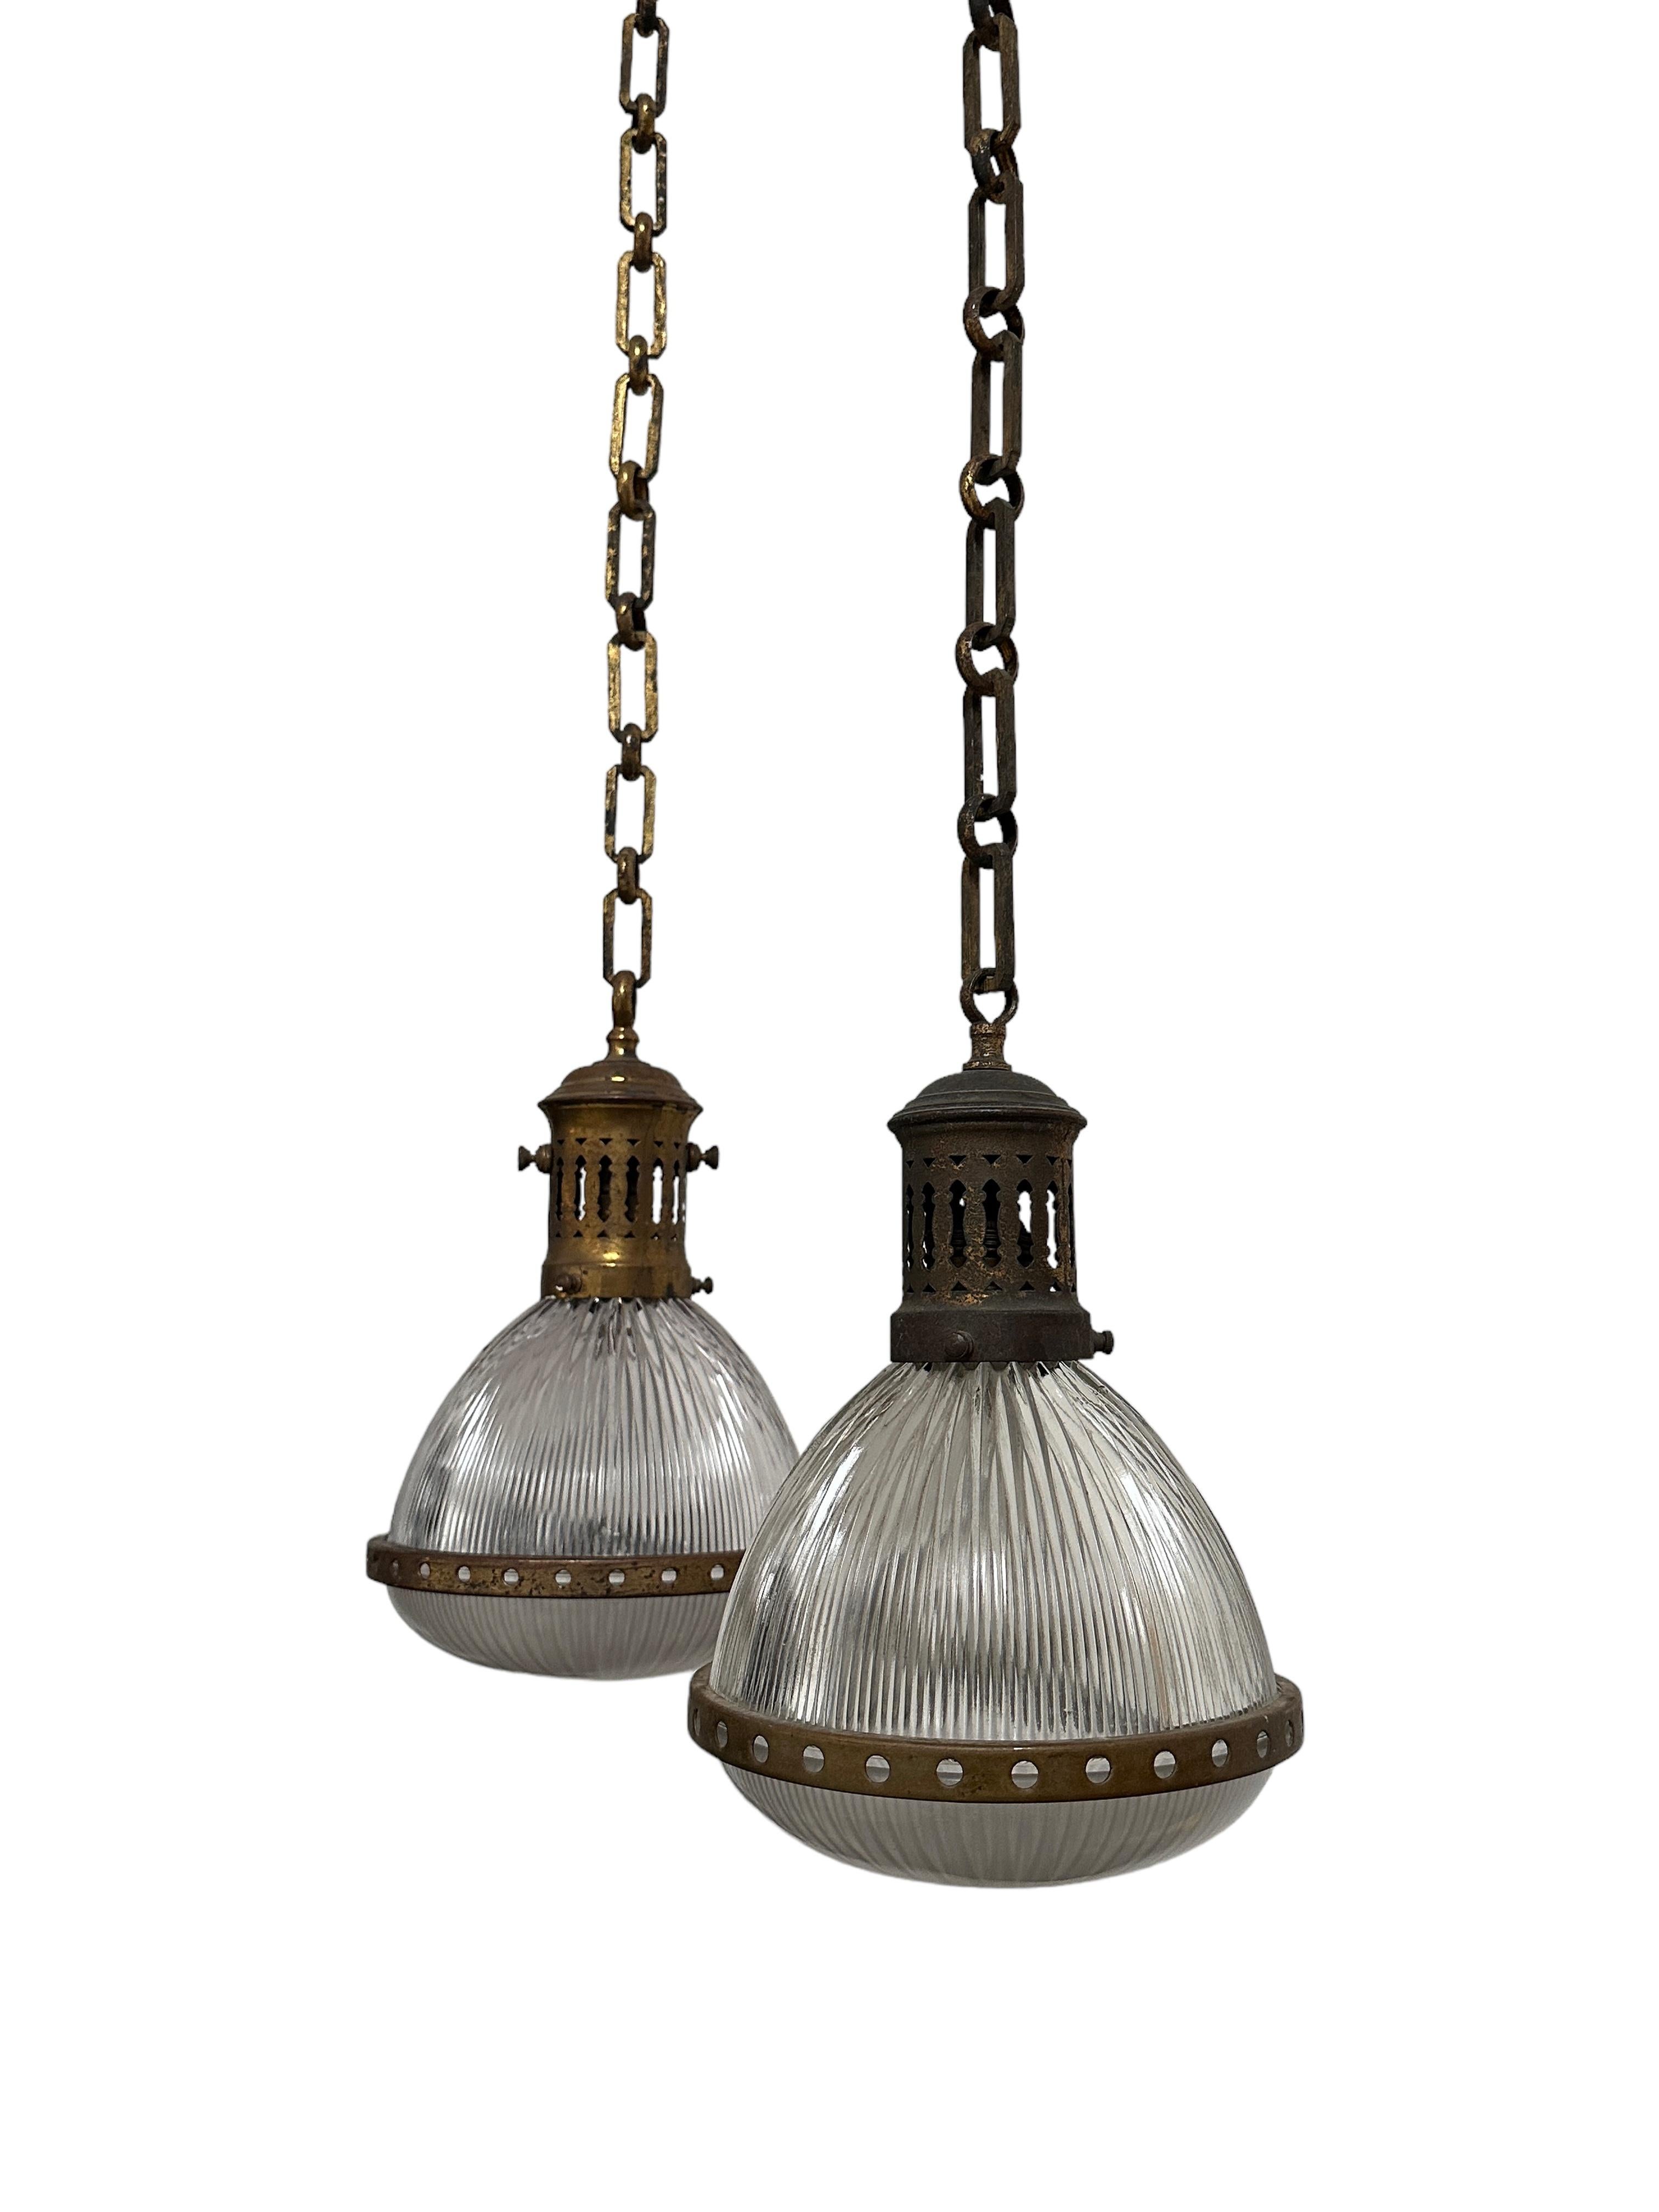 Antique Vintage French Caged Teardrop Holophane Glass Ceiling Pendant Light Lamp In Good Condition For Sale In Sale, GB